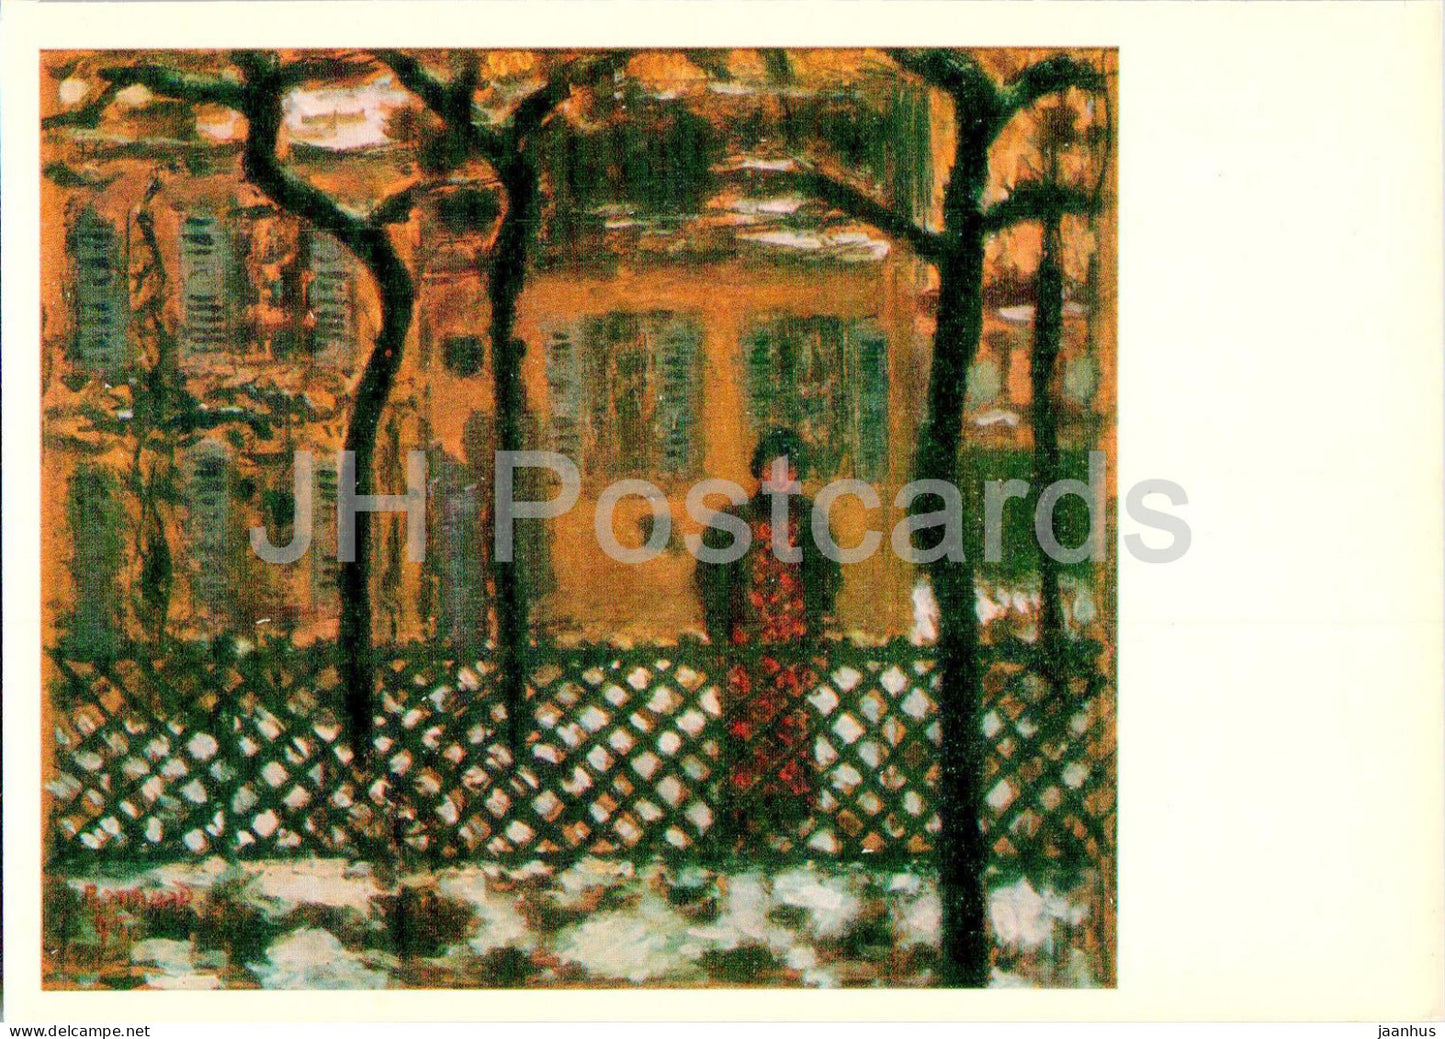 painting by Pierre Bonnard - Behind the fence - French art - 1977 - Russia USSR - unused - JH Postcards